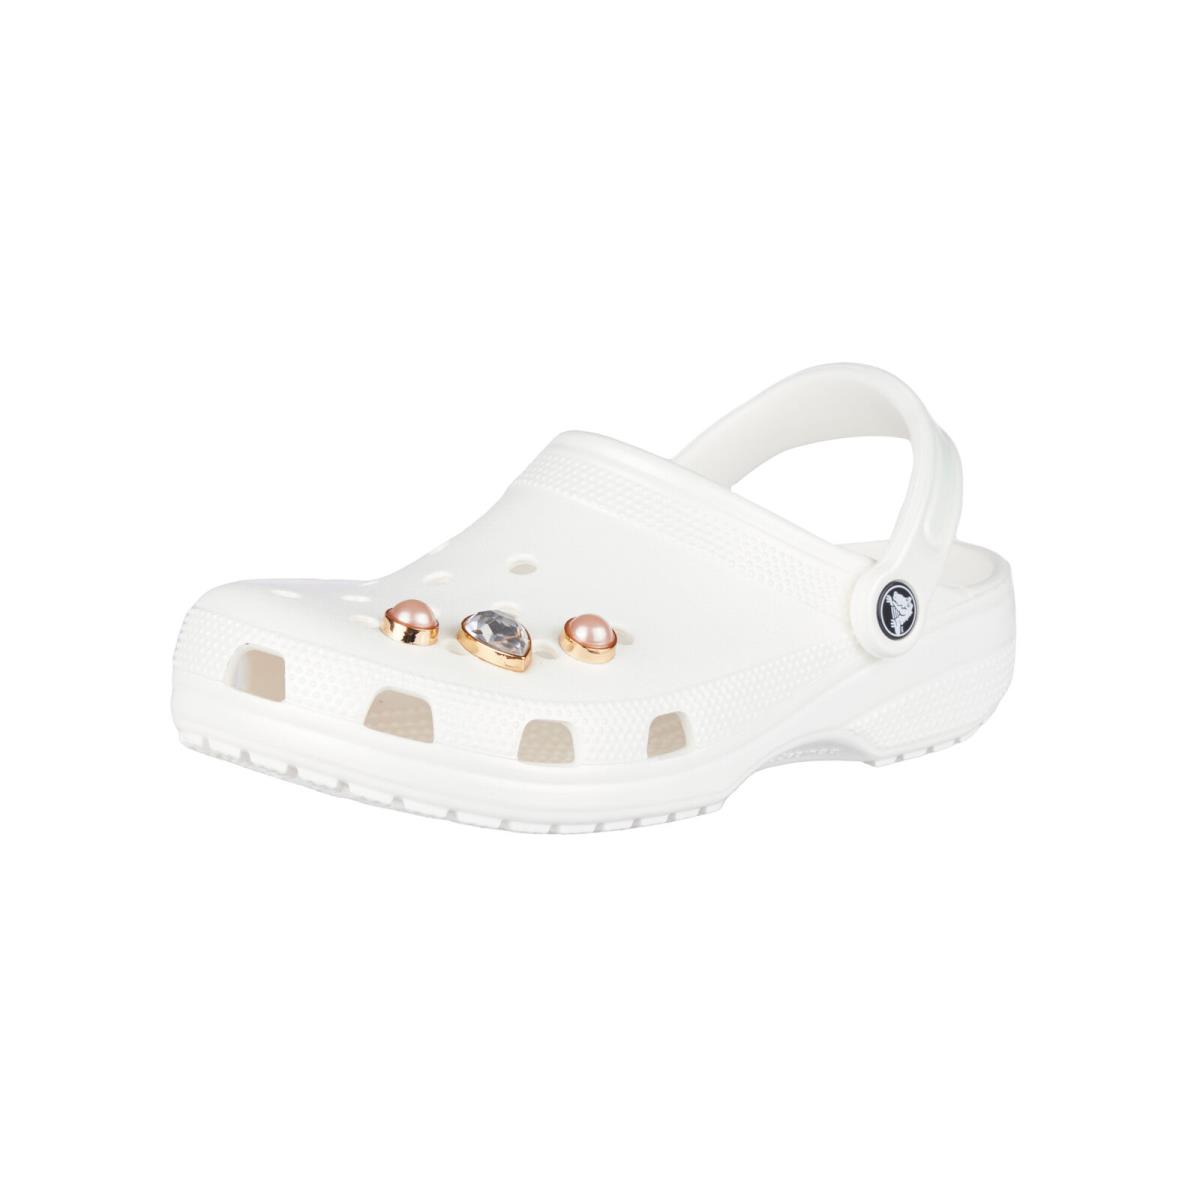 Crocs Women`s Classic Metallic Platform Clogs with Pearl and Crystal Jibbitz White